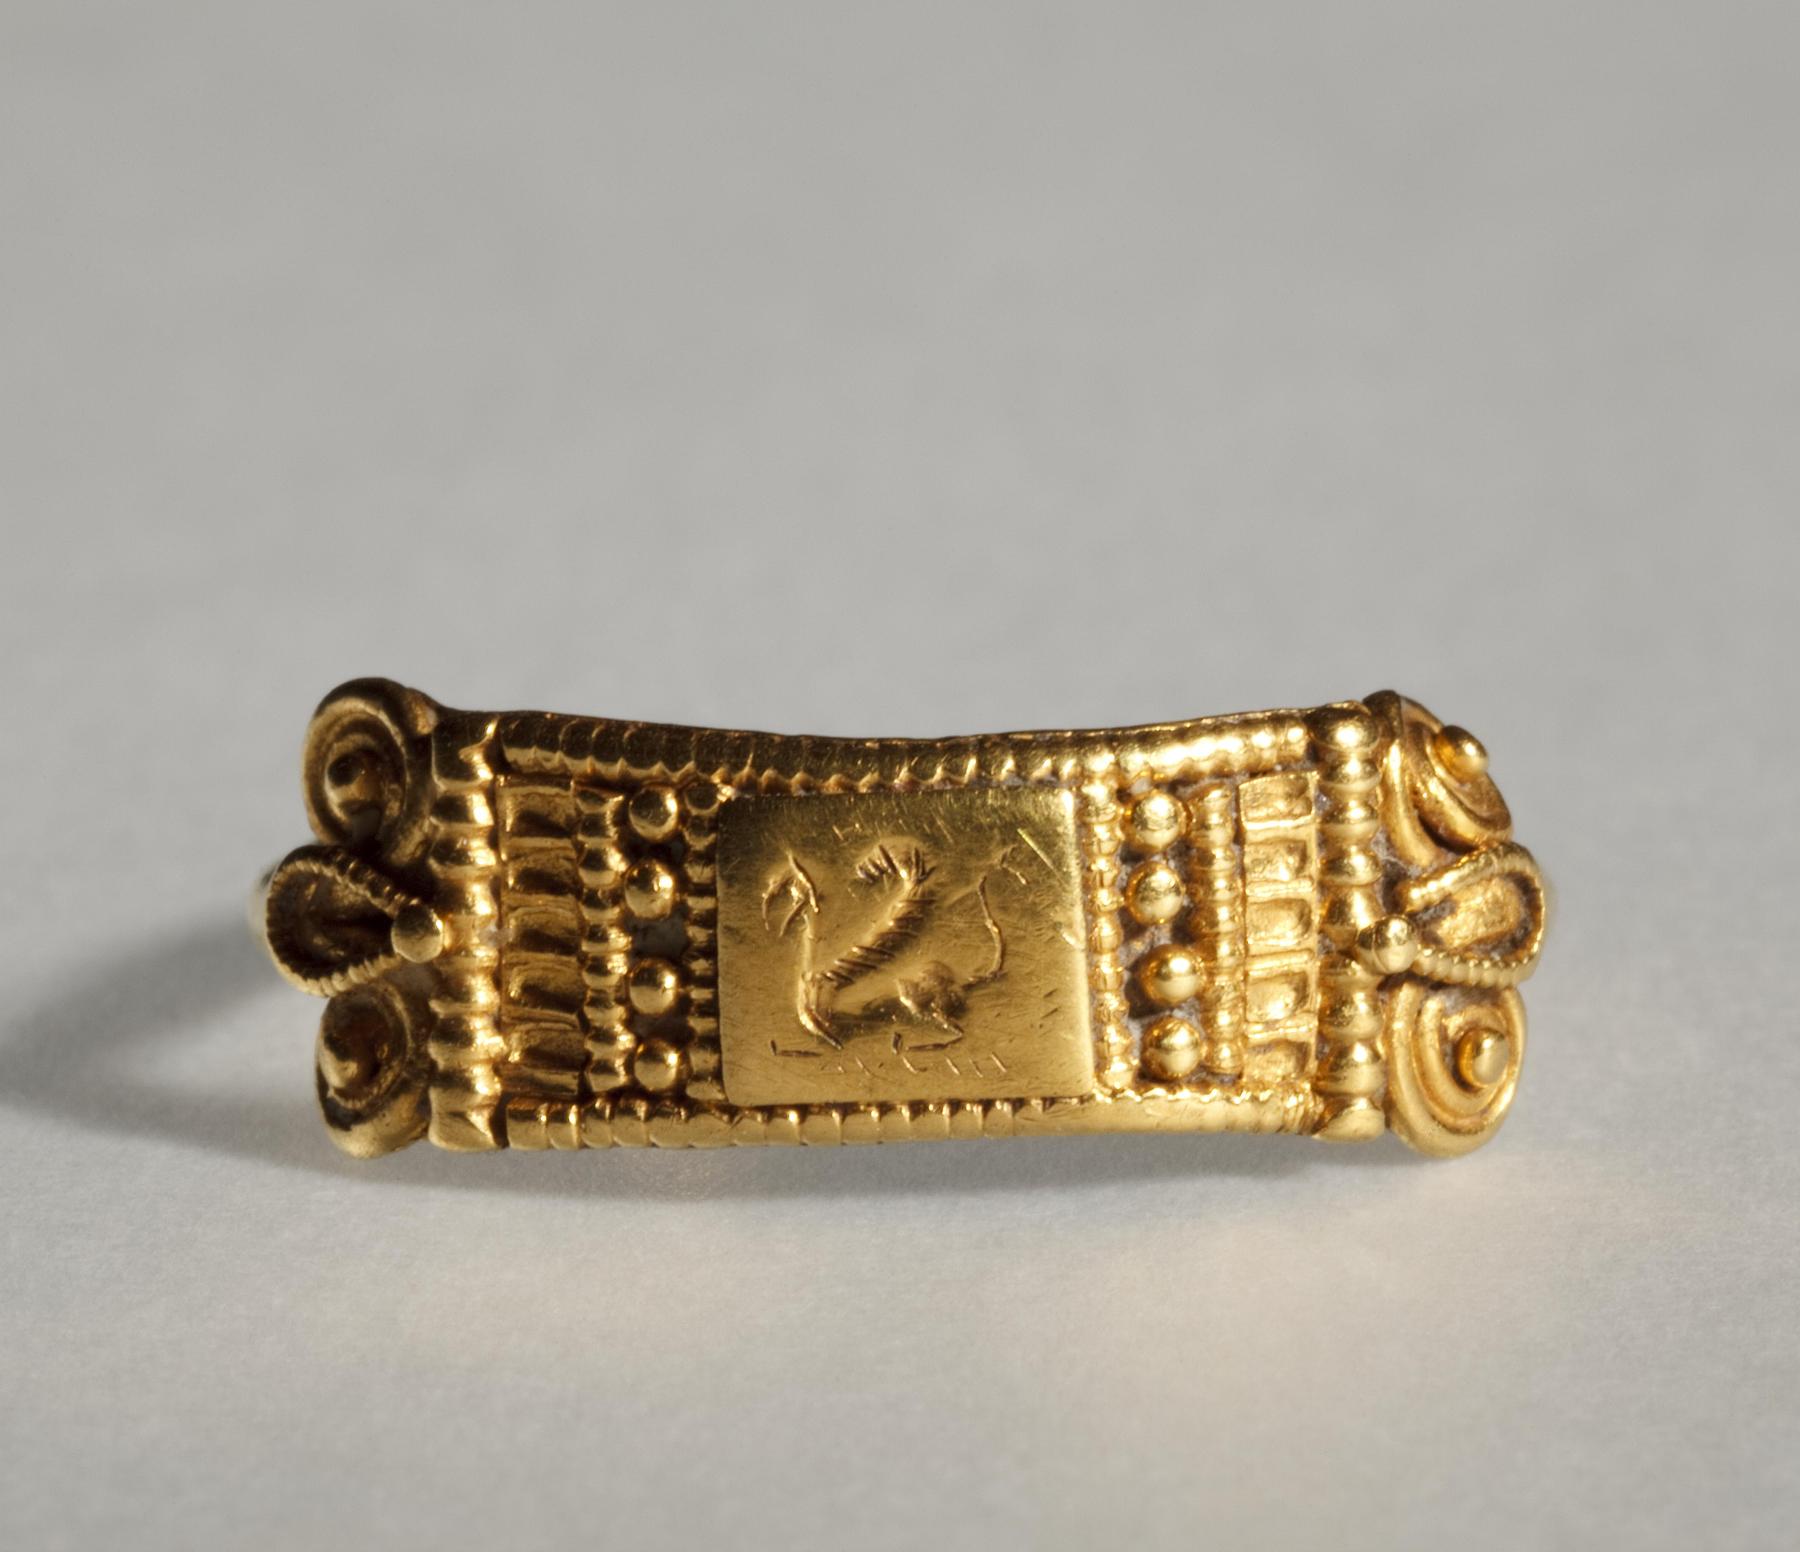 Finger ring with a griffin, H1803